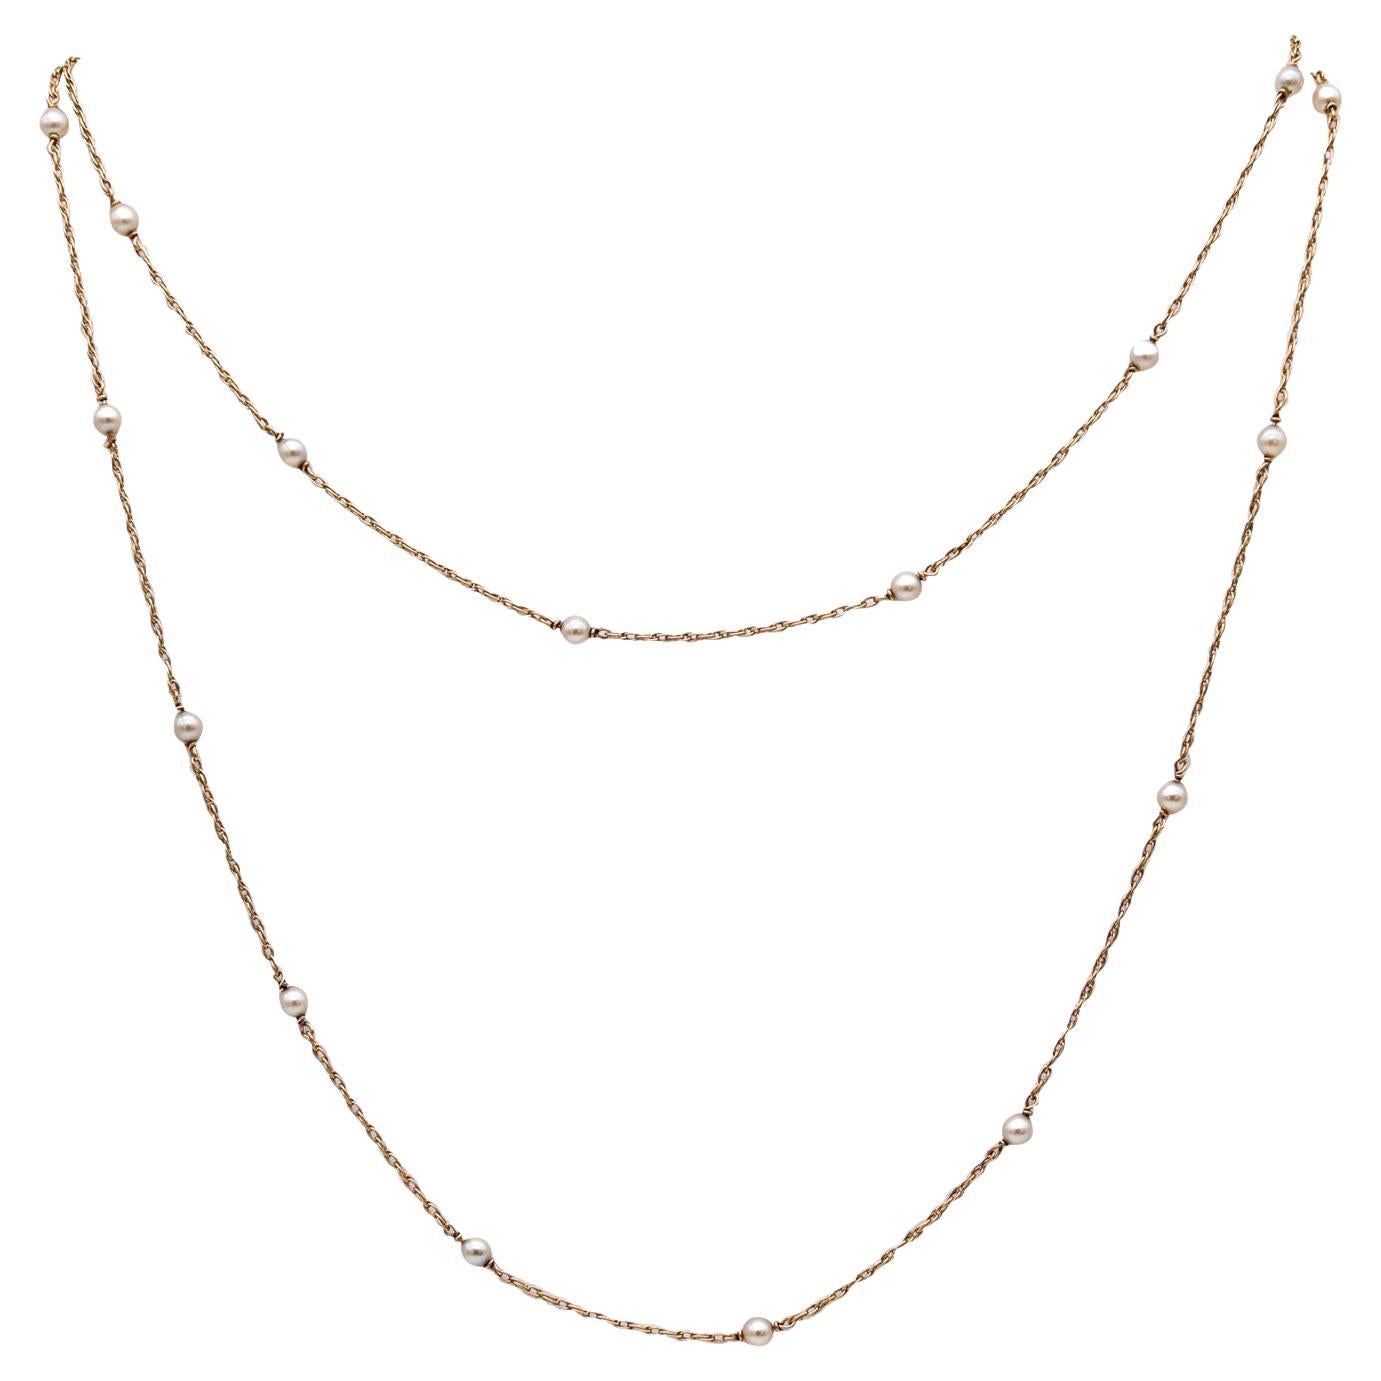 Art Deco 1930 Station Sautoir in 14kt Yellow Gold with 24 Natural Round Pearls